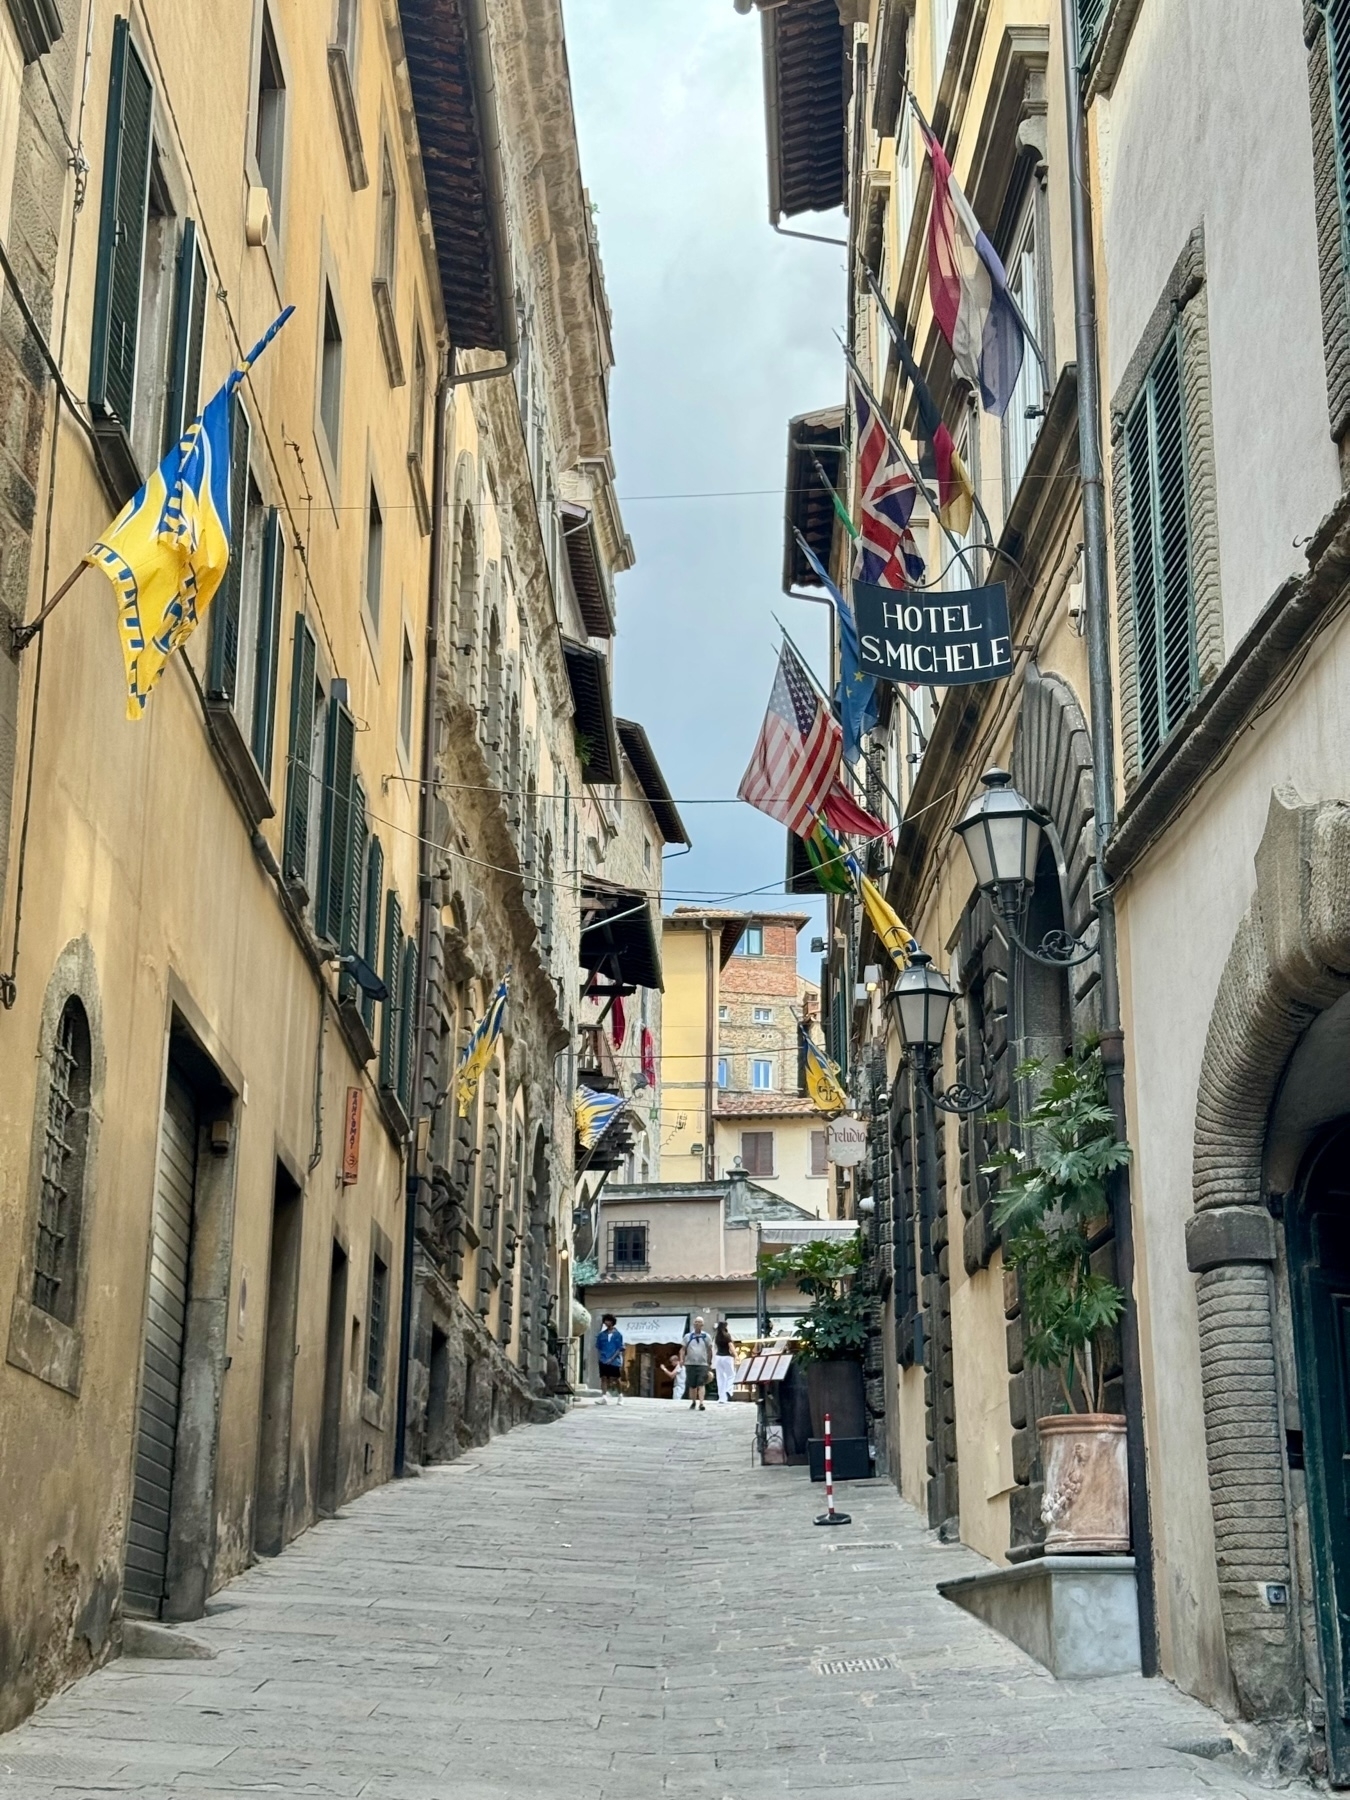 A narrow, cobbled street lined with historic buildings and colorful flags hanging from windows, with a sign for “Hotel S. Michele” on the right side. A few pedestrians can be seen in the distance. 